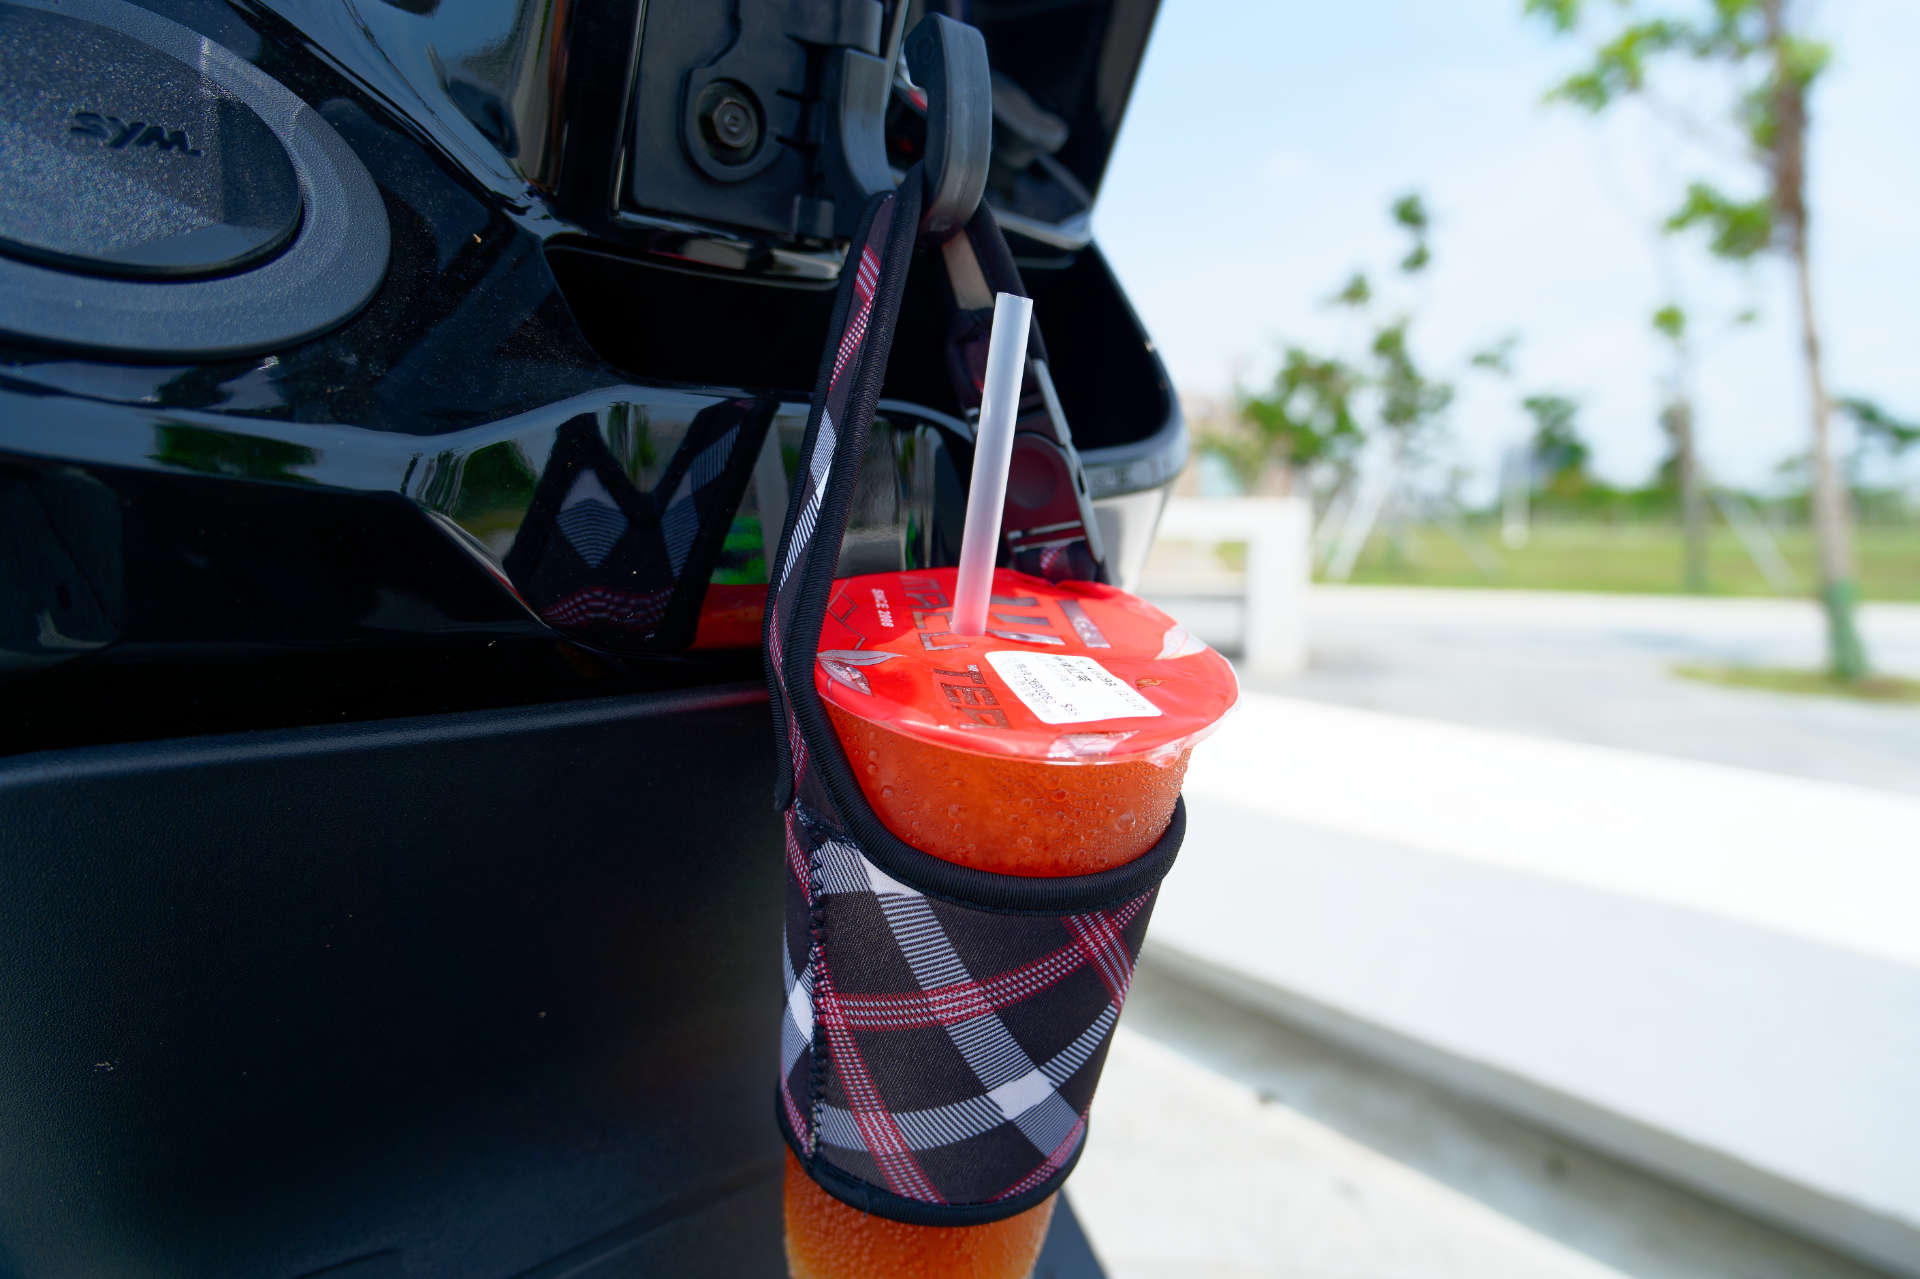 A cup of sugar-free iced lemon black tea in a tea holder, hanging from a hook on an SYM scooter.